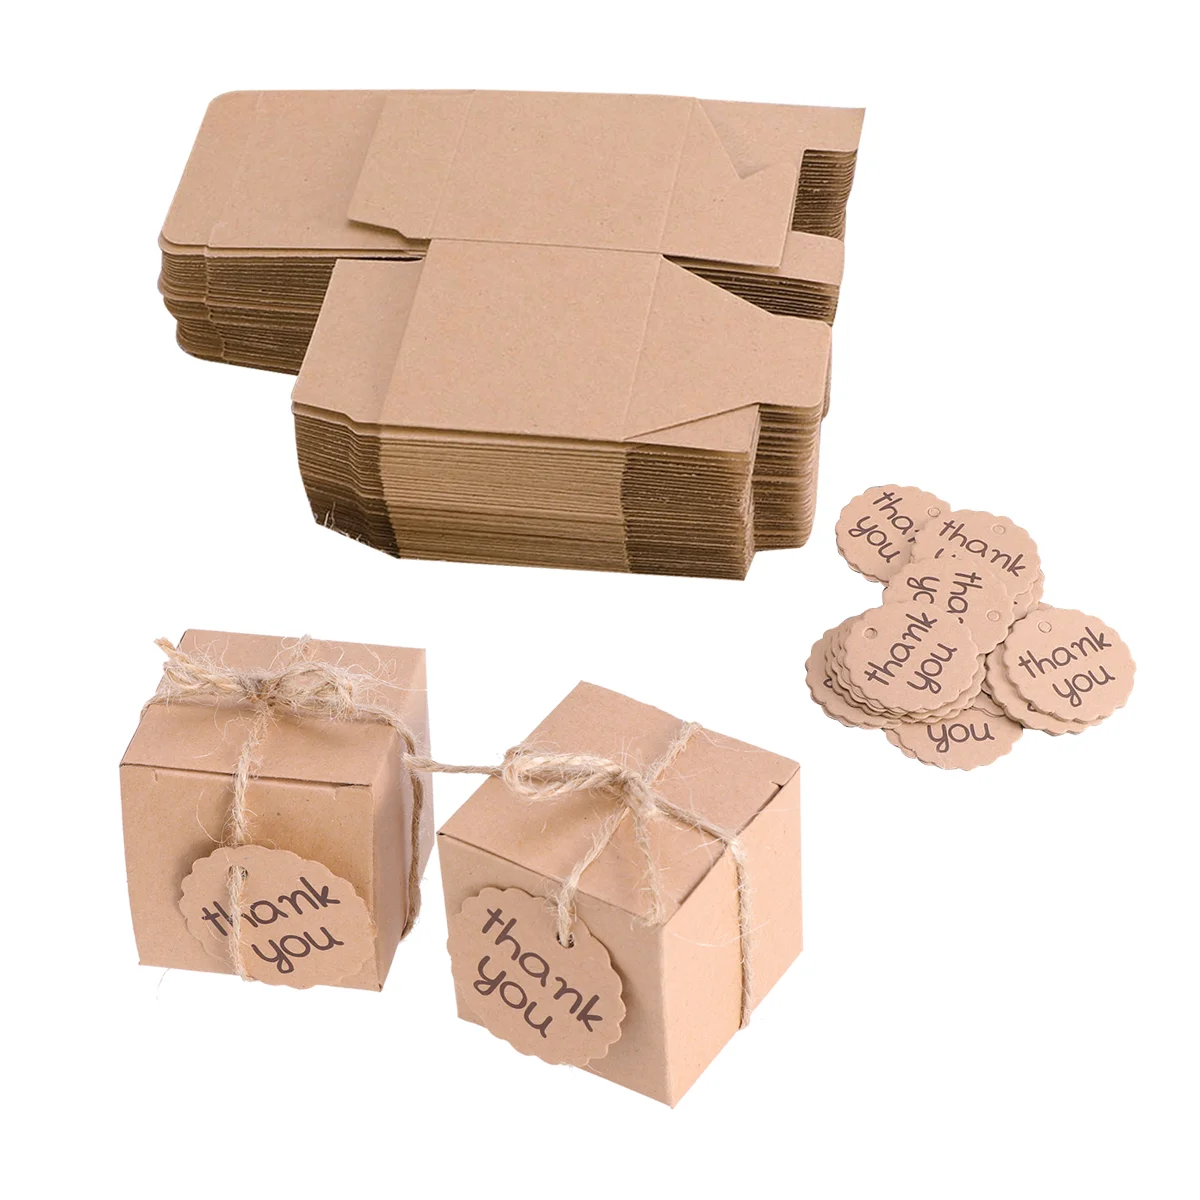 

Boxes Candy Gift Kraft Wedding Paper You Thank Box Brown Treat Favor Boxe Christmas Foldable Rustic Pillow Goodie Dessert